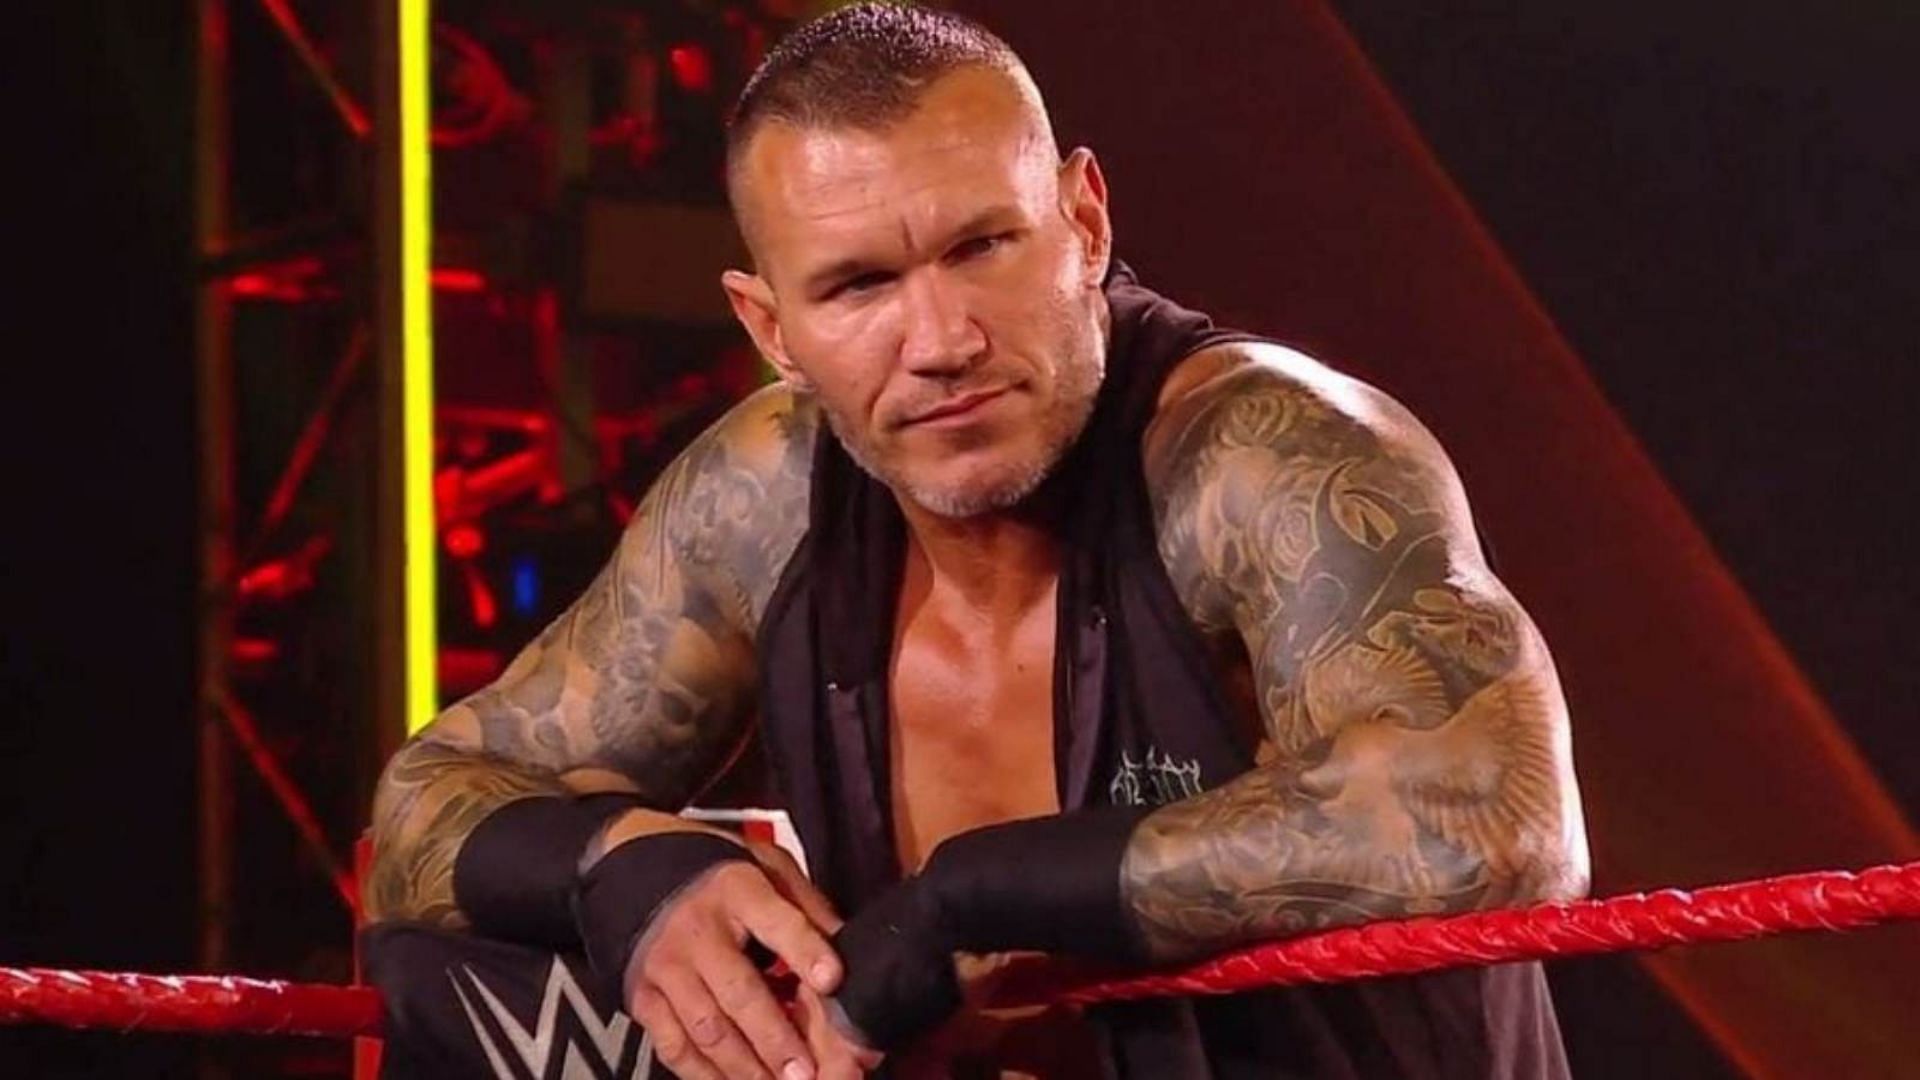 Orton recently completed 20 years in WWE